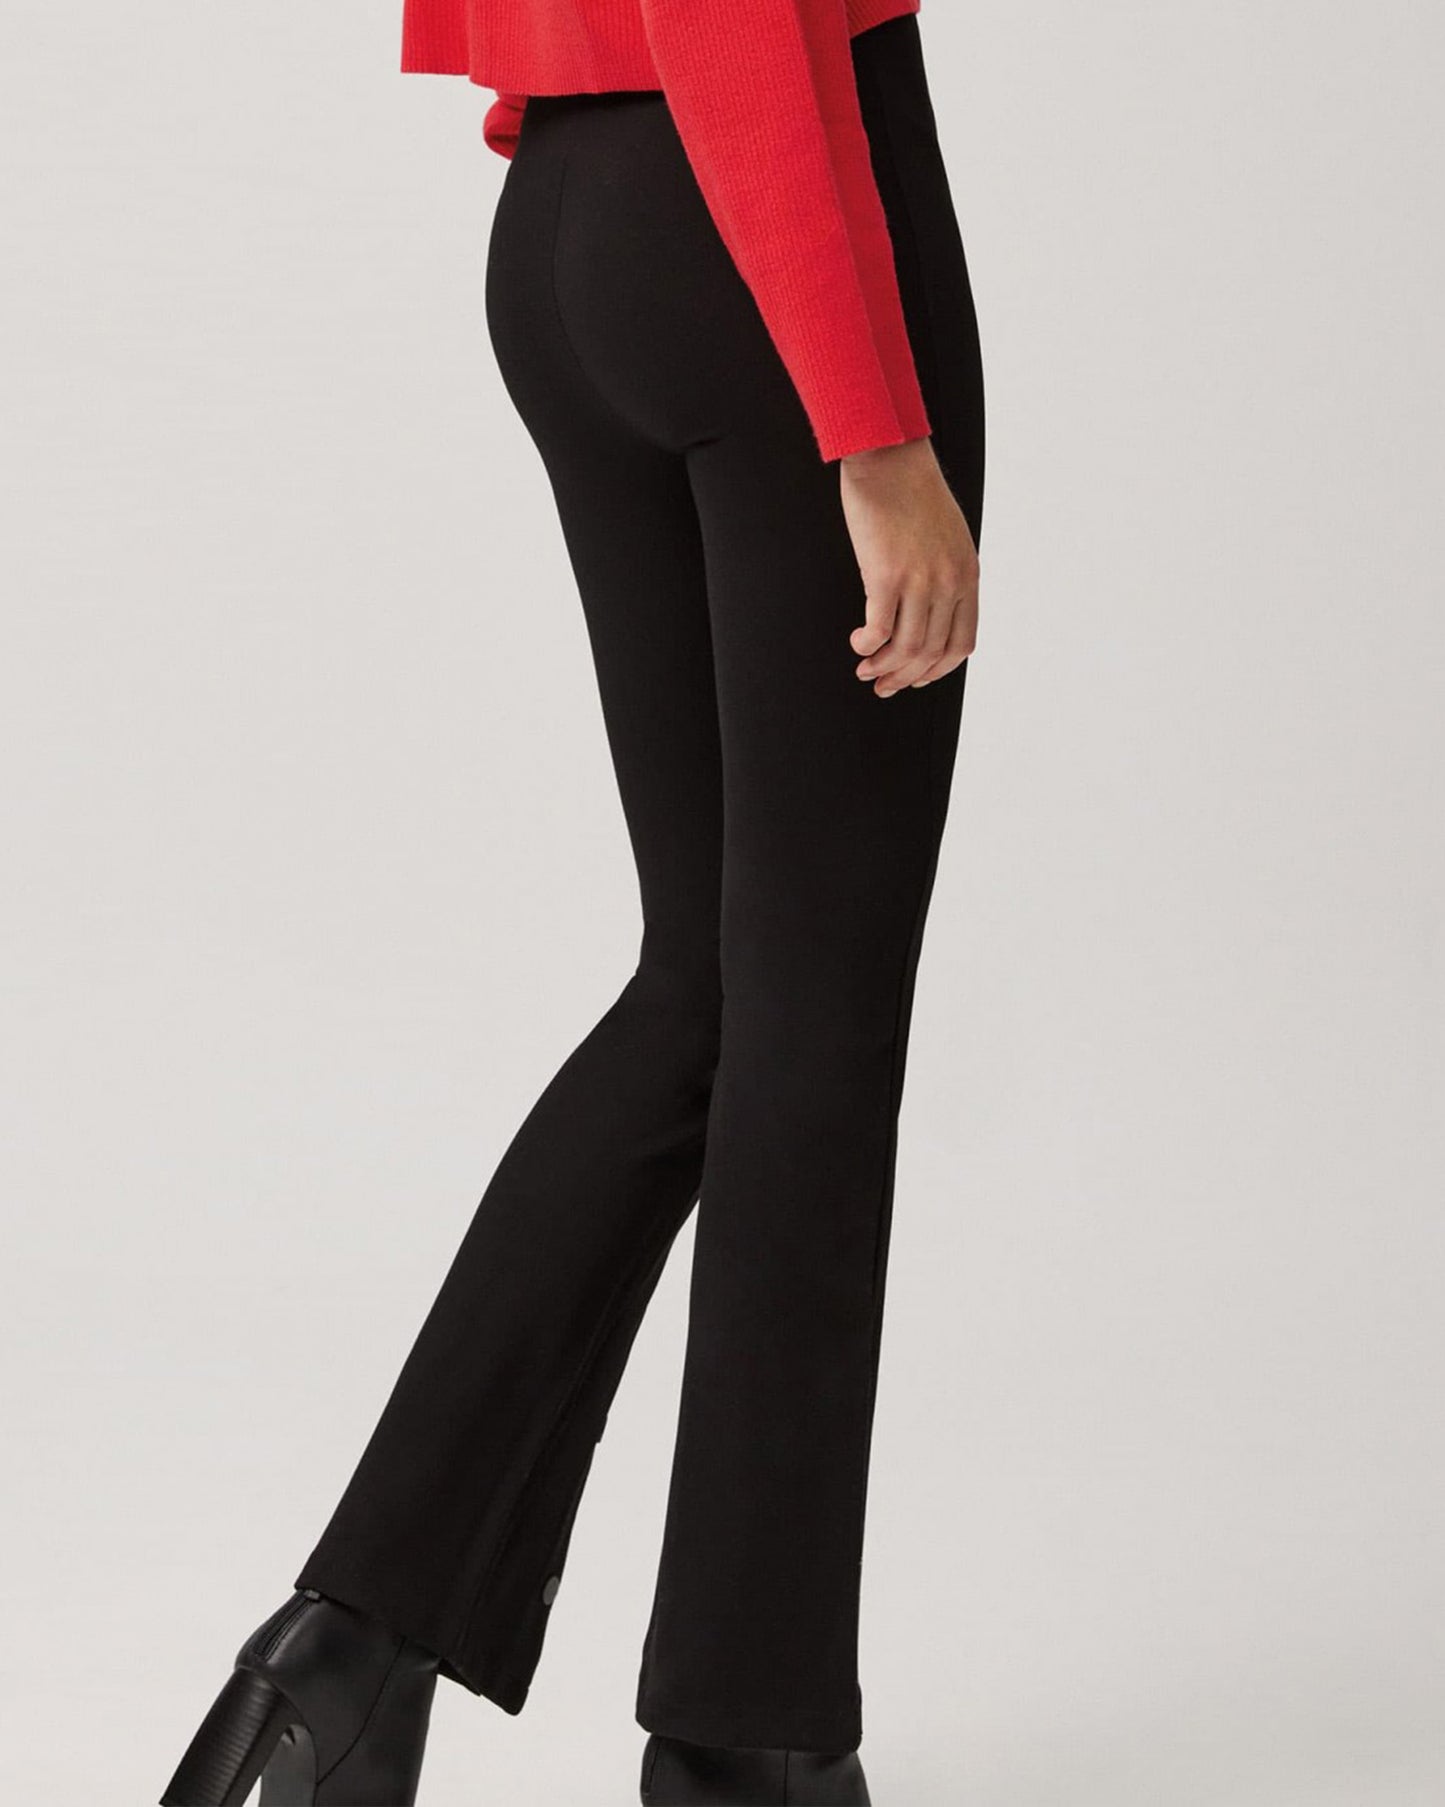 Ysabel Mora 70153 Flared Button Leggings - Black high waisted stretch trouser leggings (treggings) with split buttoned flare bottom. Worn with red sweater and black ankle boots. Back view.